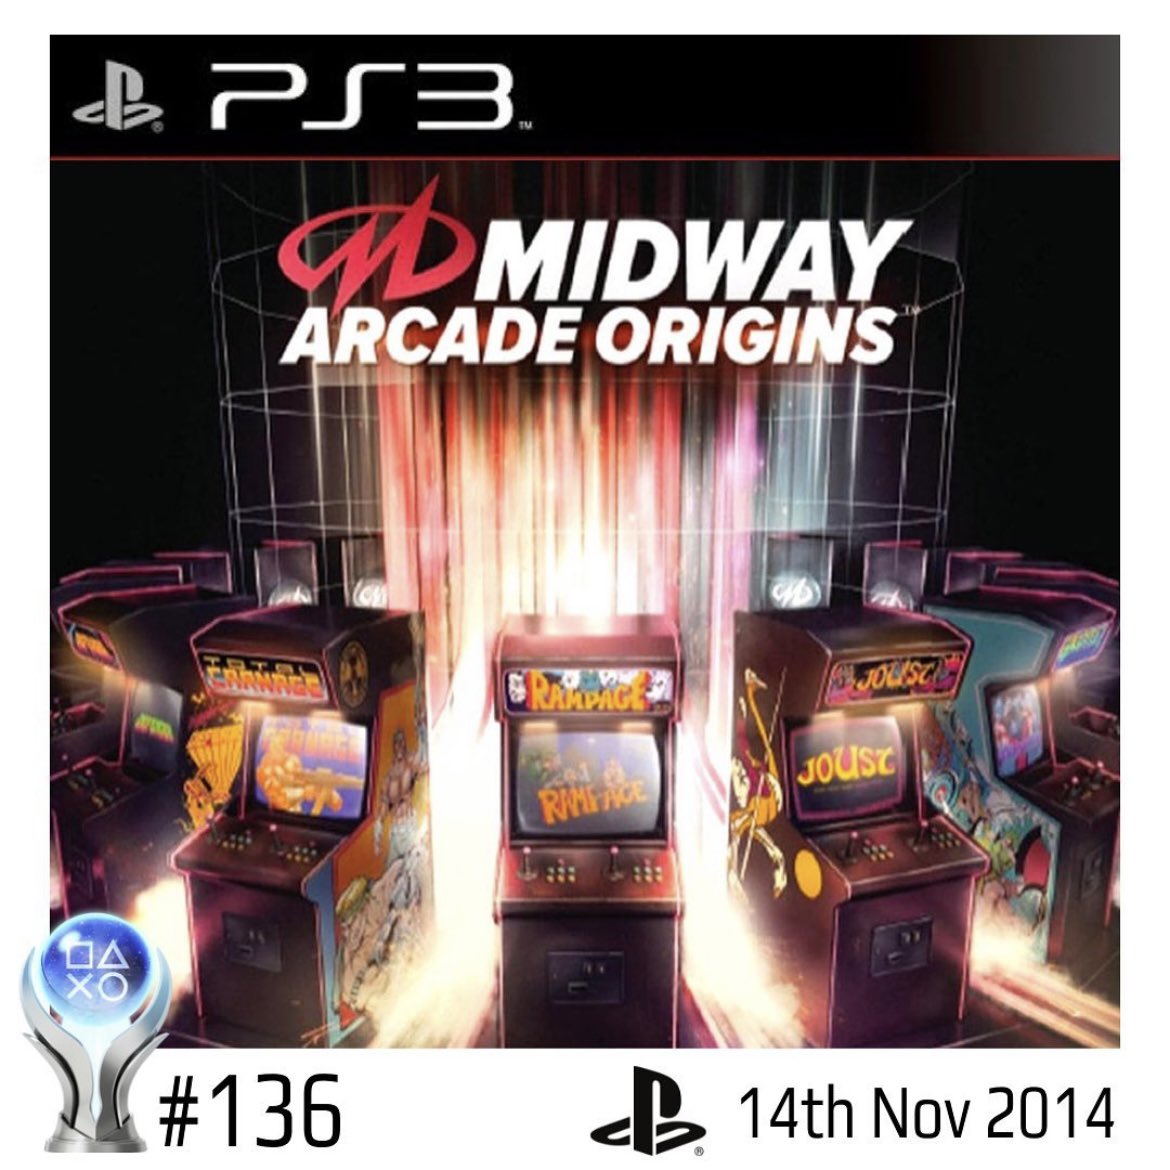 🏆HOWDY’S PLATINUM HISTORY🏆

Platinum 136: Midway Arcade Origins

Date Earned: 14th November 2014

More Info: Don’t remember much about the game besides it’s a collection of classic arcade games.

#TrophyHunter #TrophyHunting #PlatinumTrophy #PS3 #PlayStation #Arcade #RetroGames